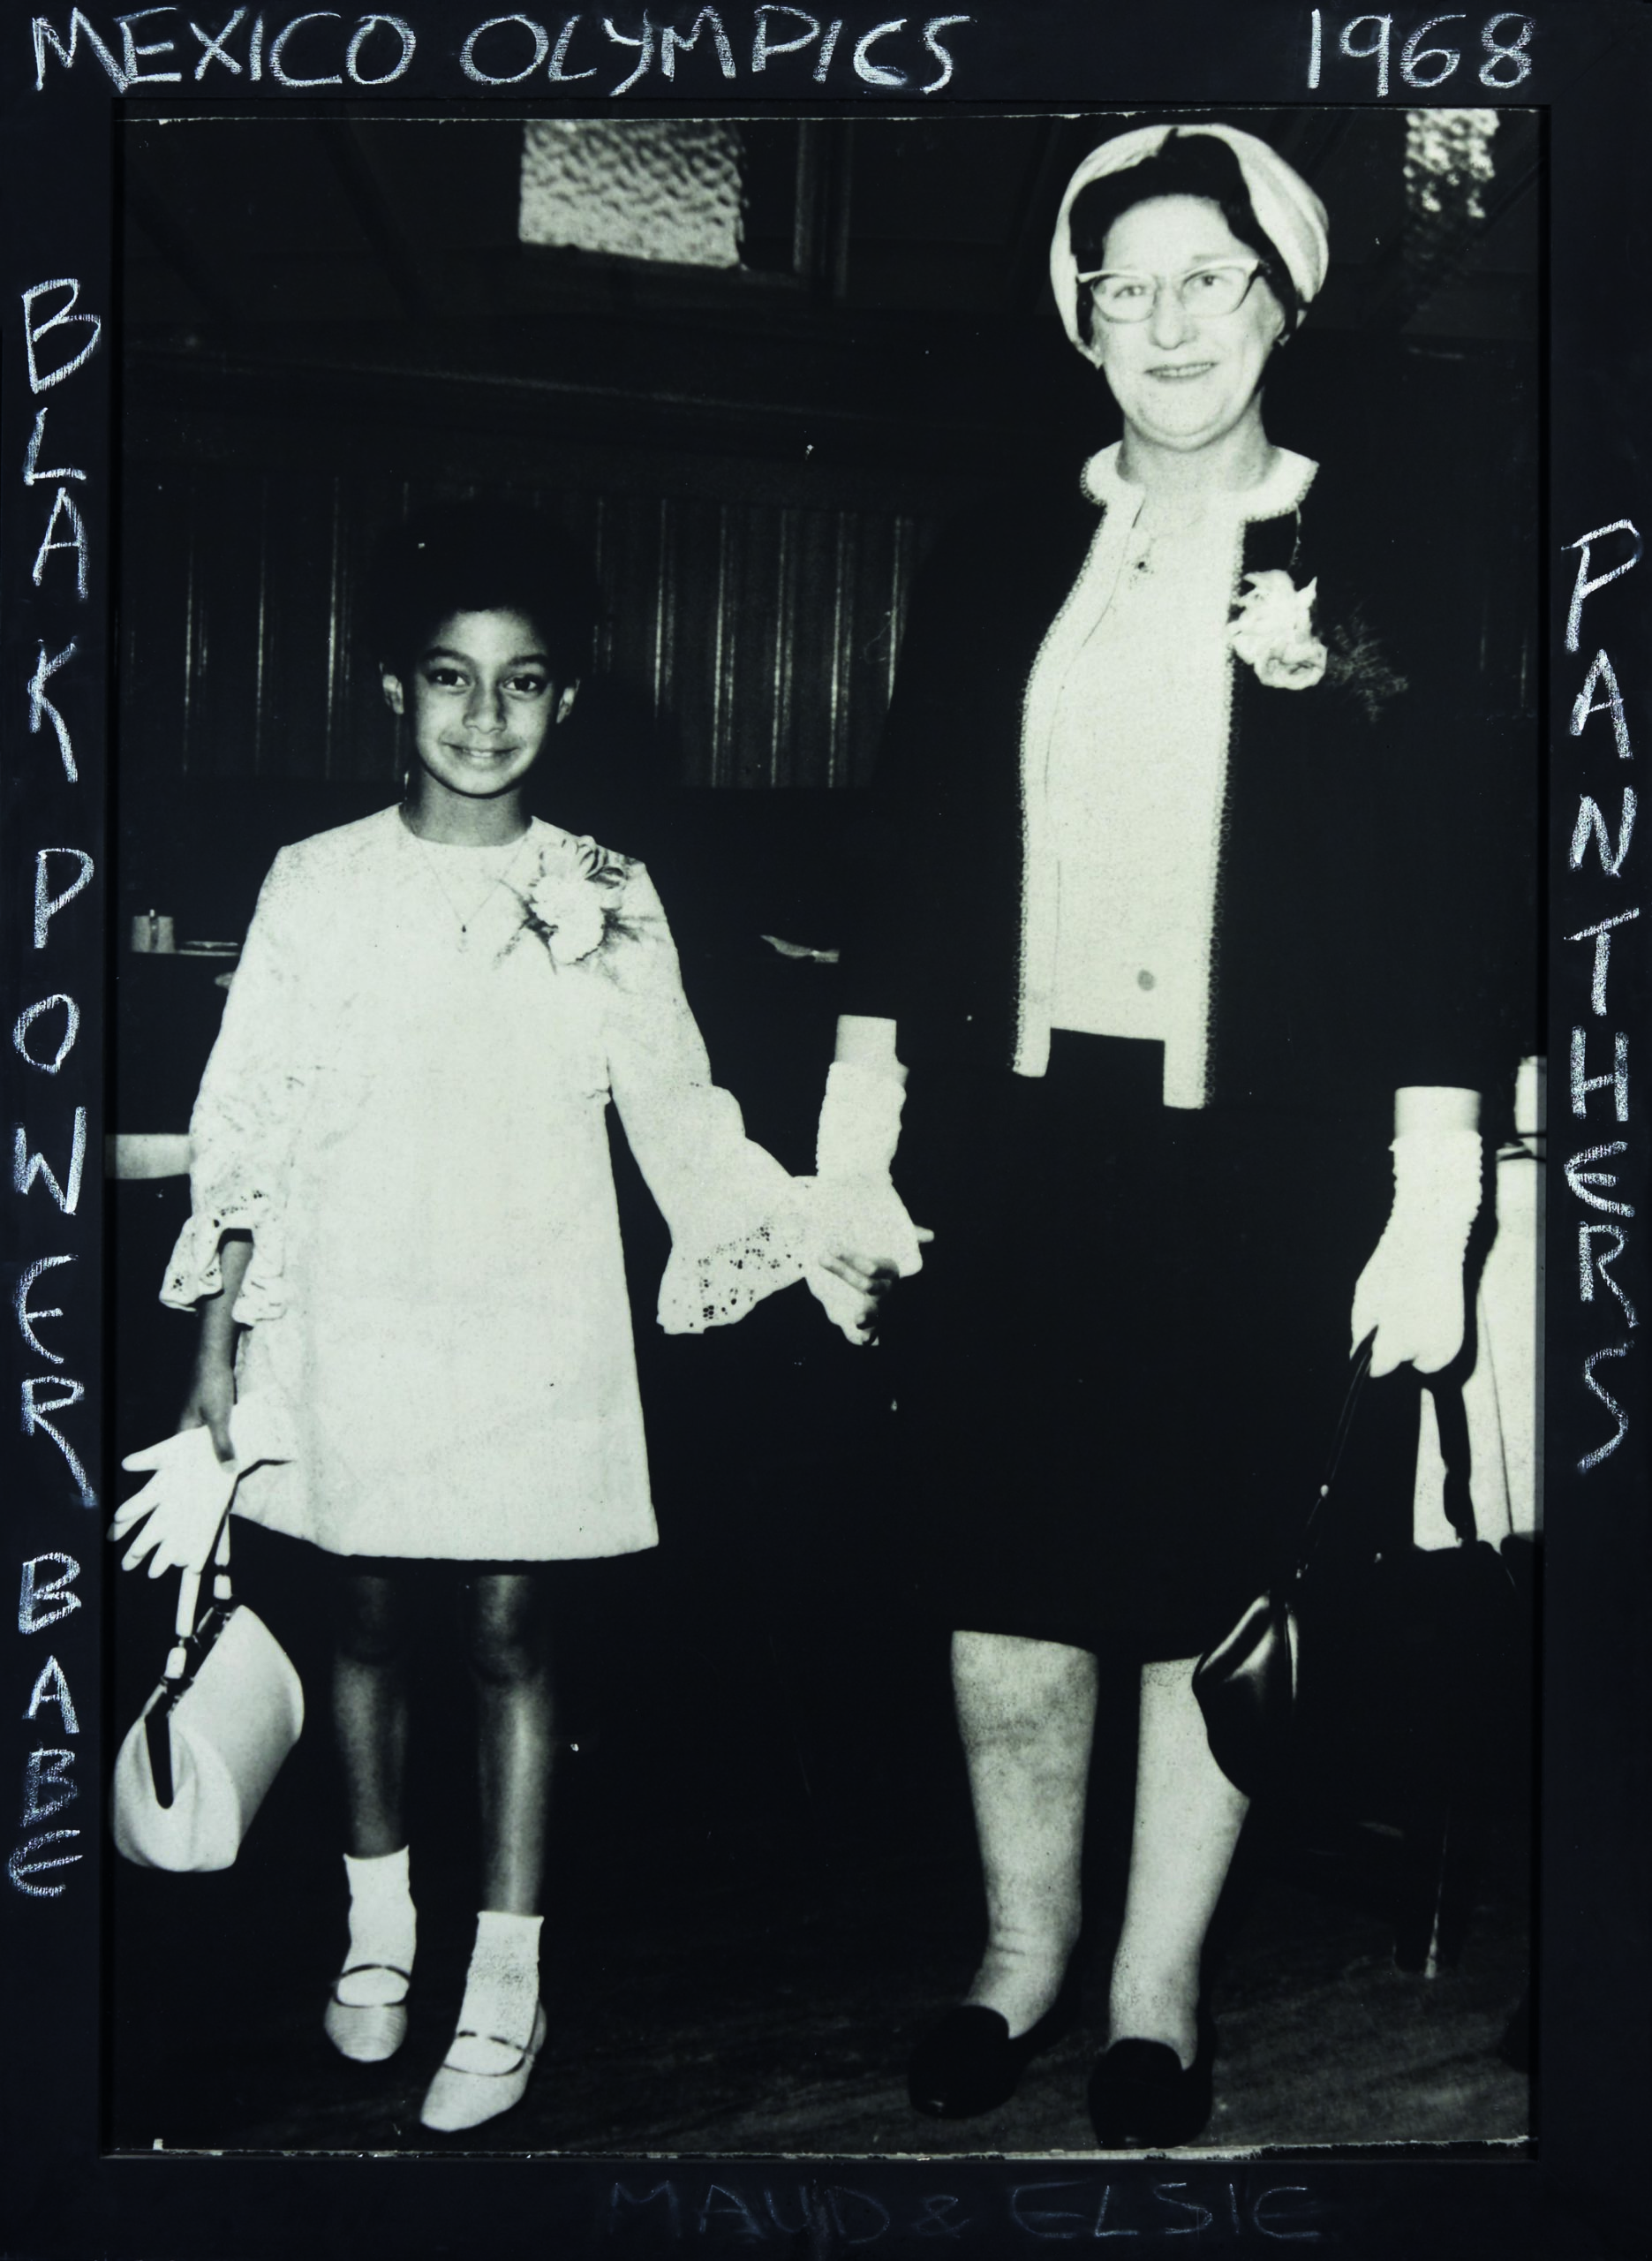 Black and white photograph of a young child holding hands with an older lady. They are both smiling at the camera.